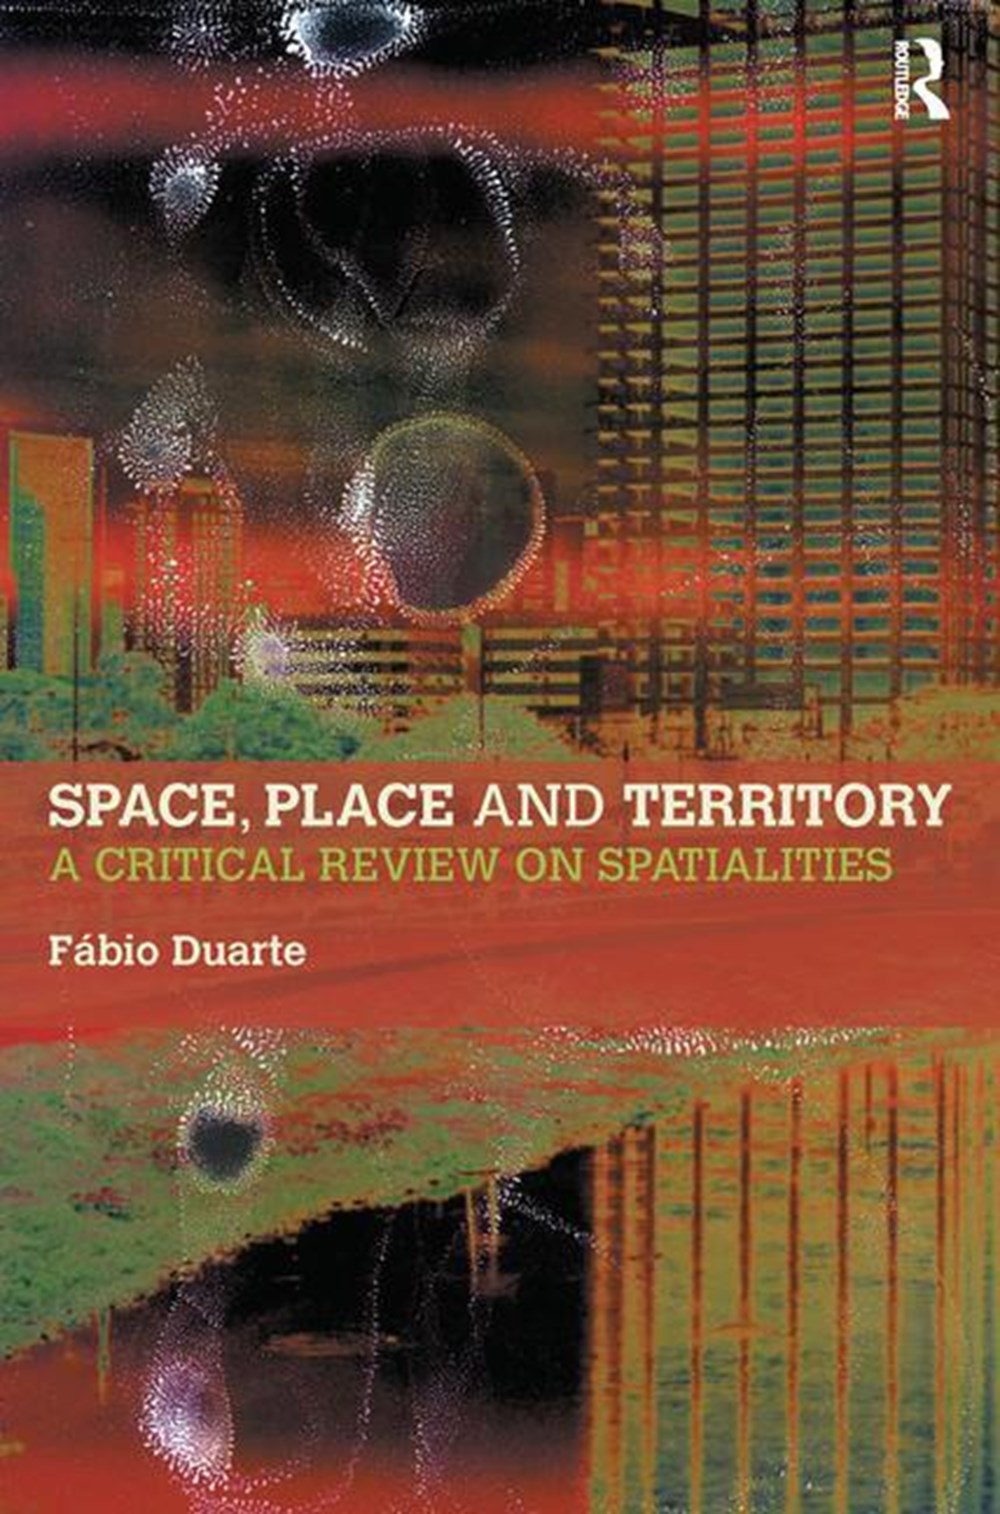 Space, Place and Territory: A Critical Review on Spatialities